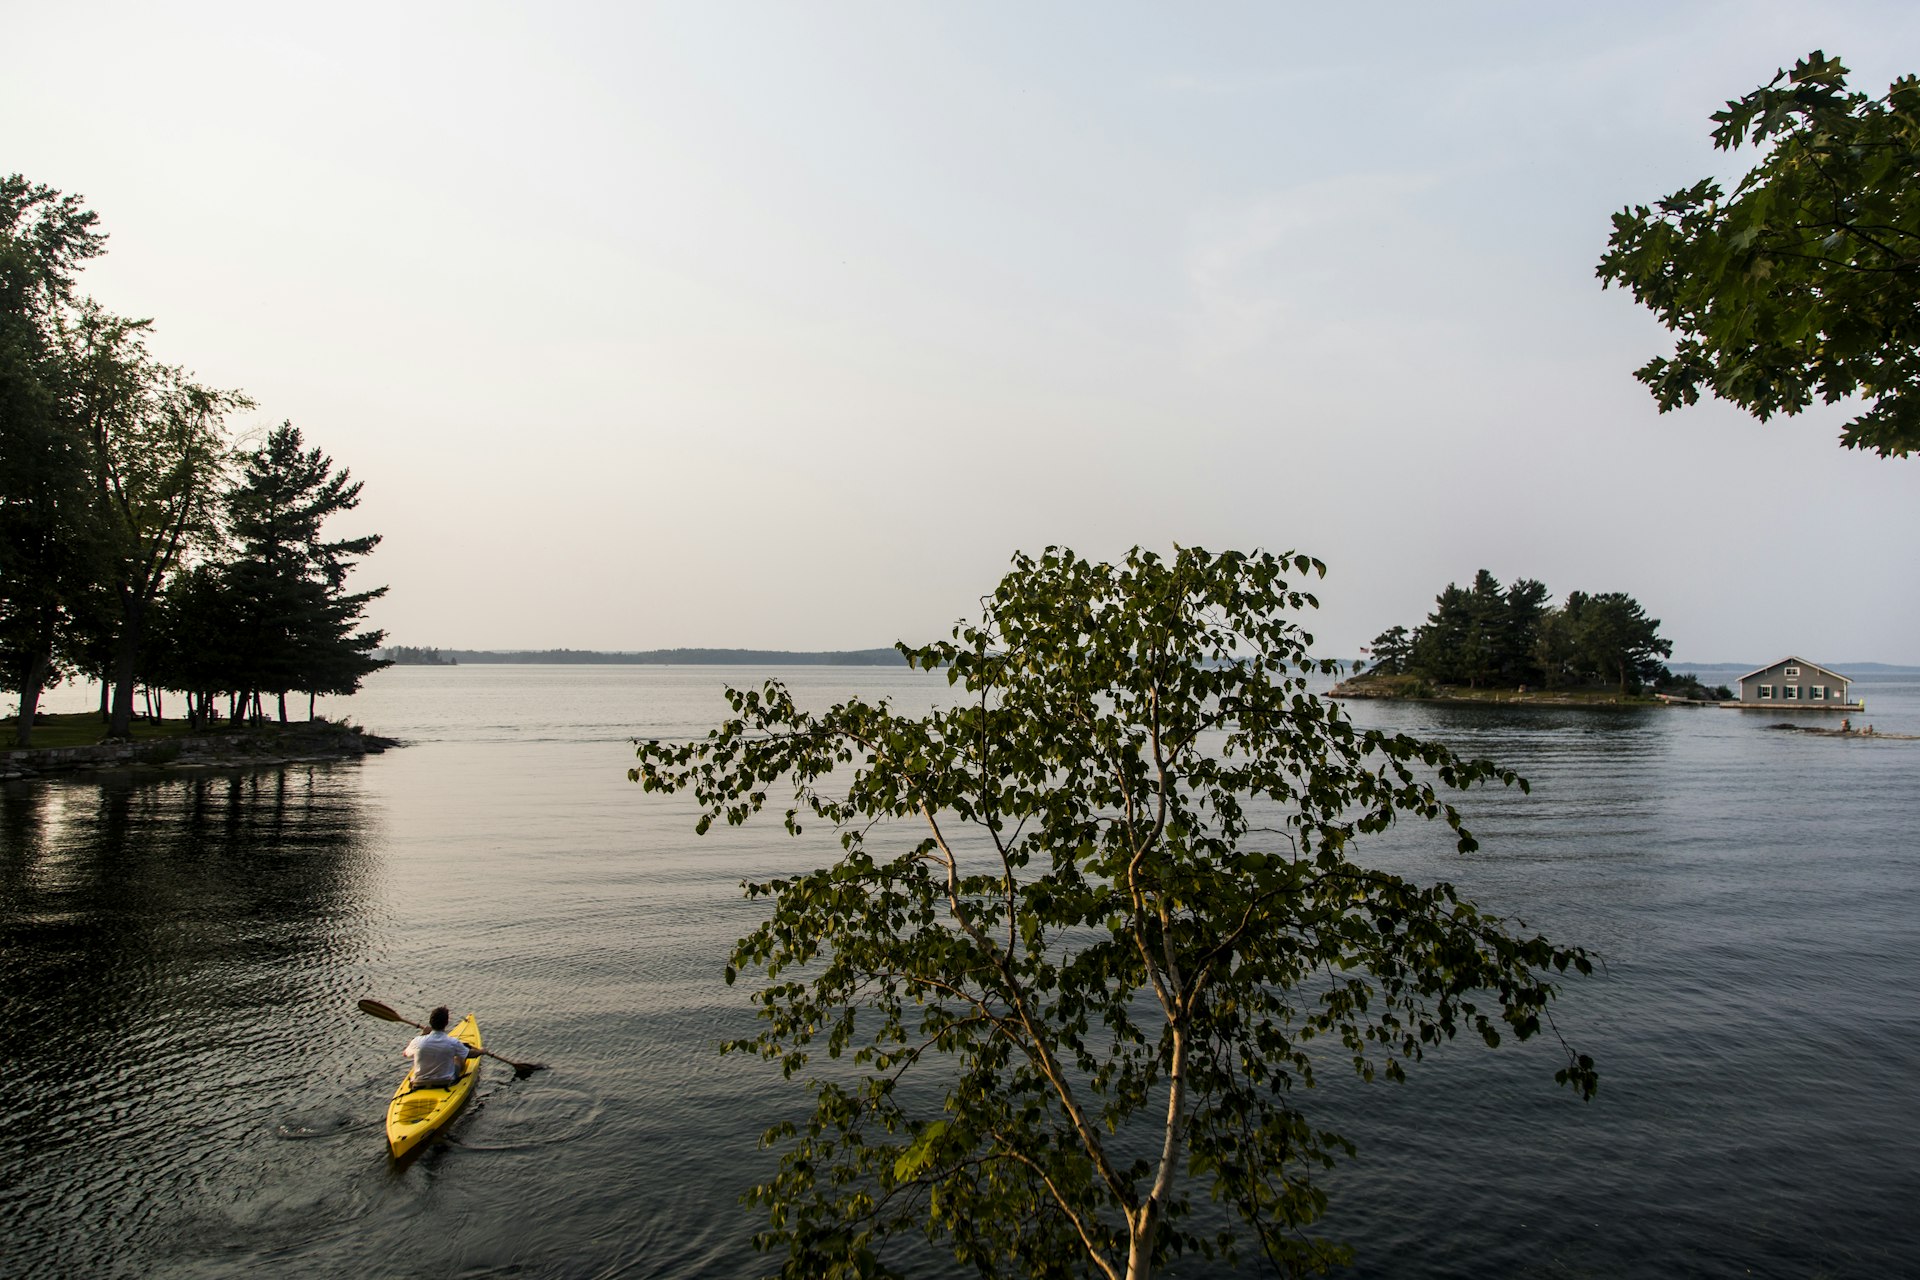 A man kayaks along the St. Lawrence River in the 1000 islands of upstate New York.